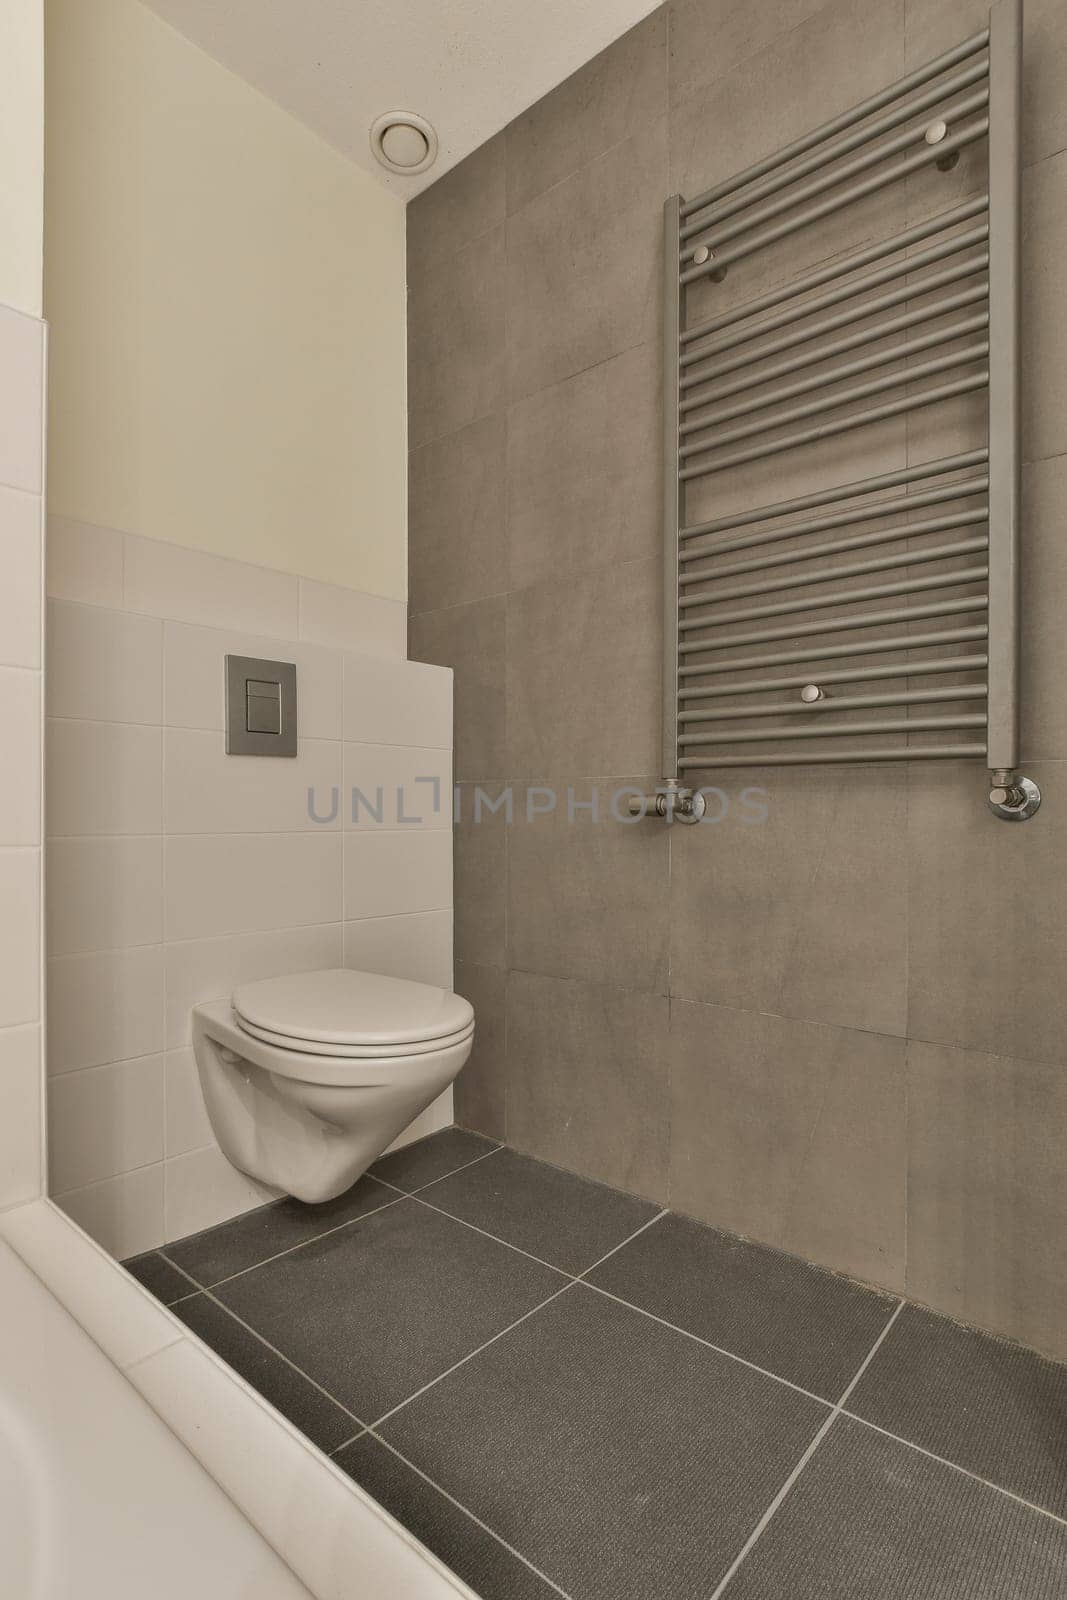 a bathroom with a white toilet and gray tiles on the floor in front of the bathtub, which is attached to the wall